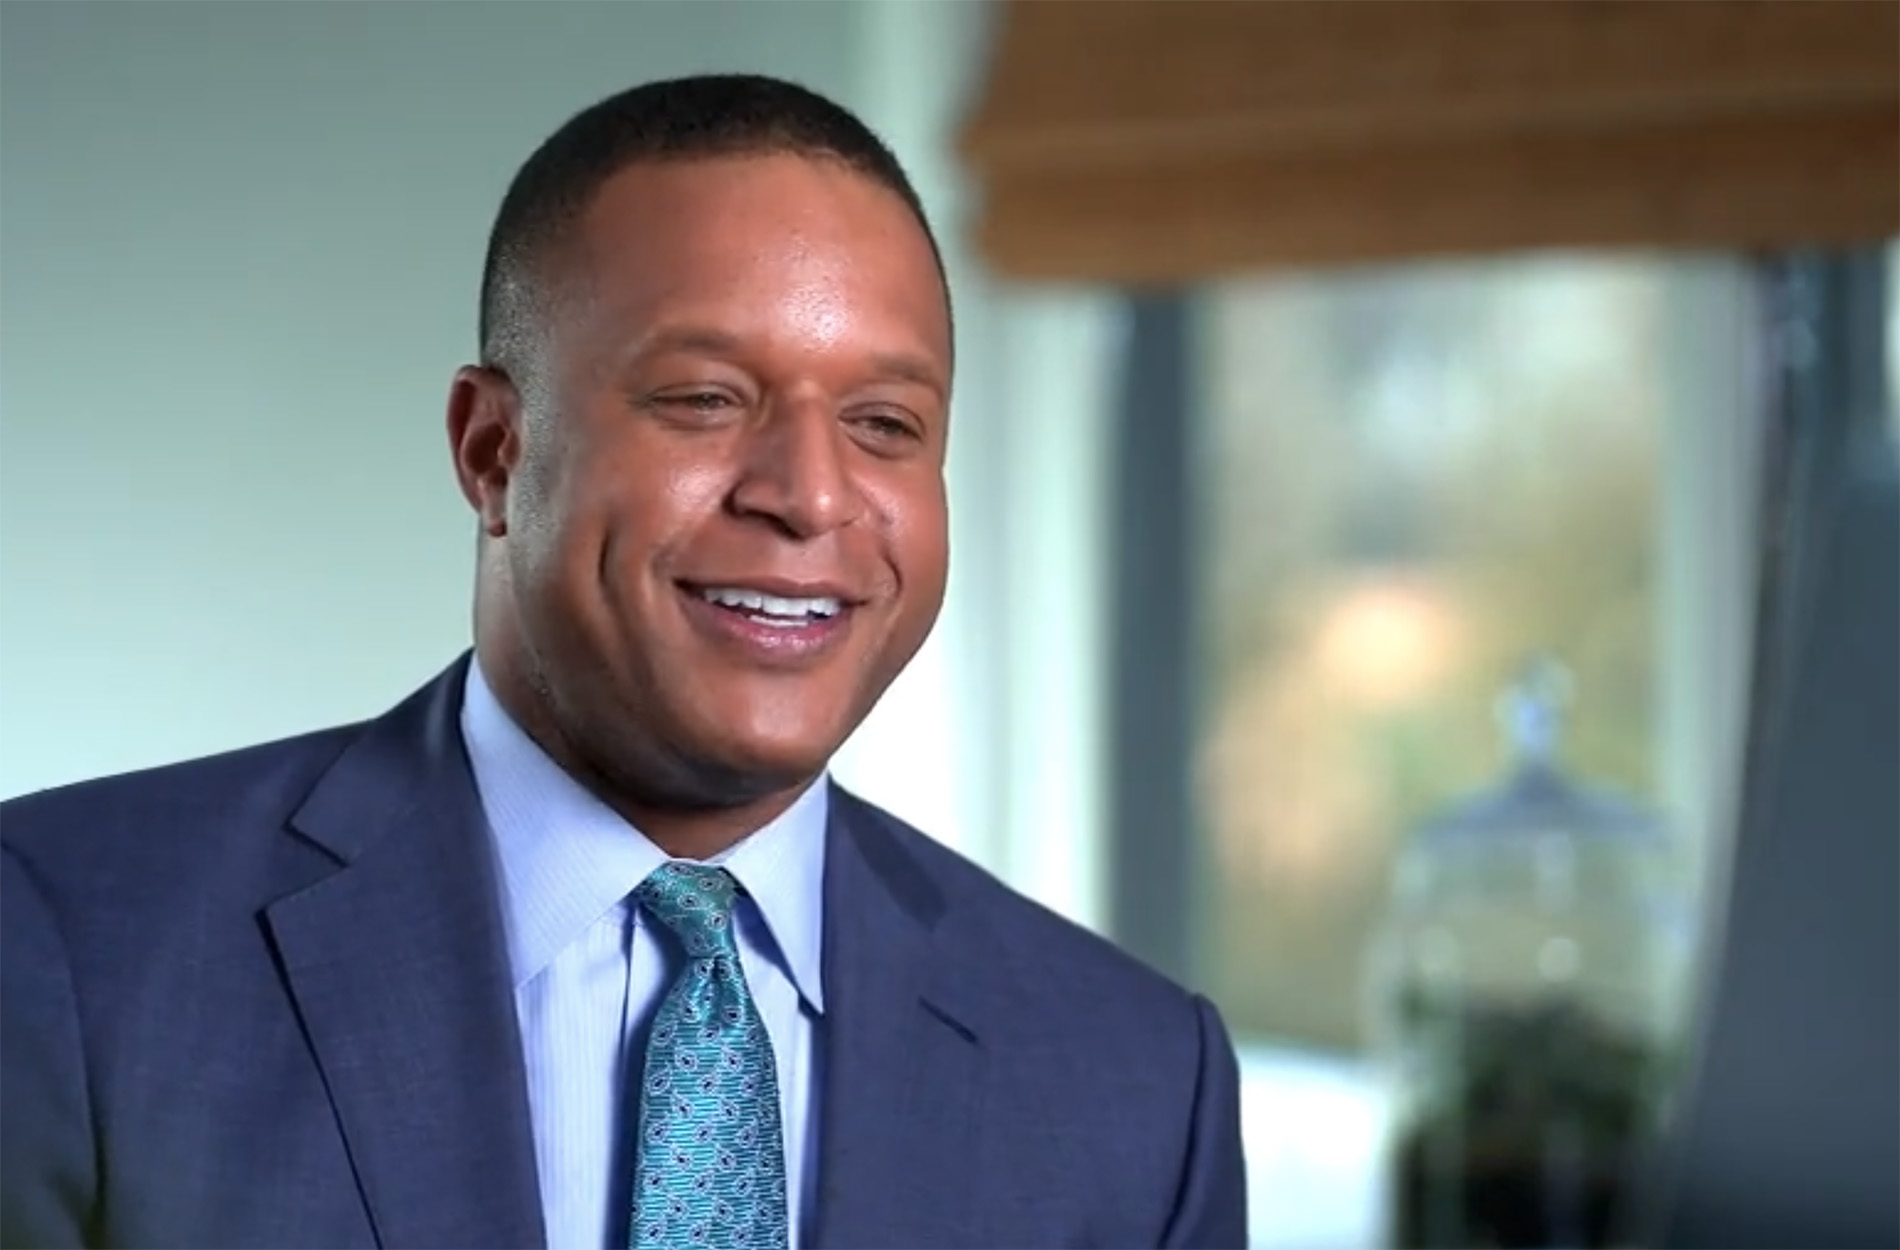 Craig Melvin conducting Zoom interview